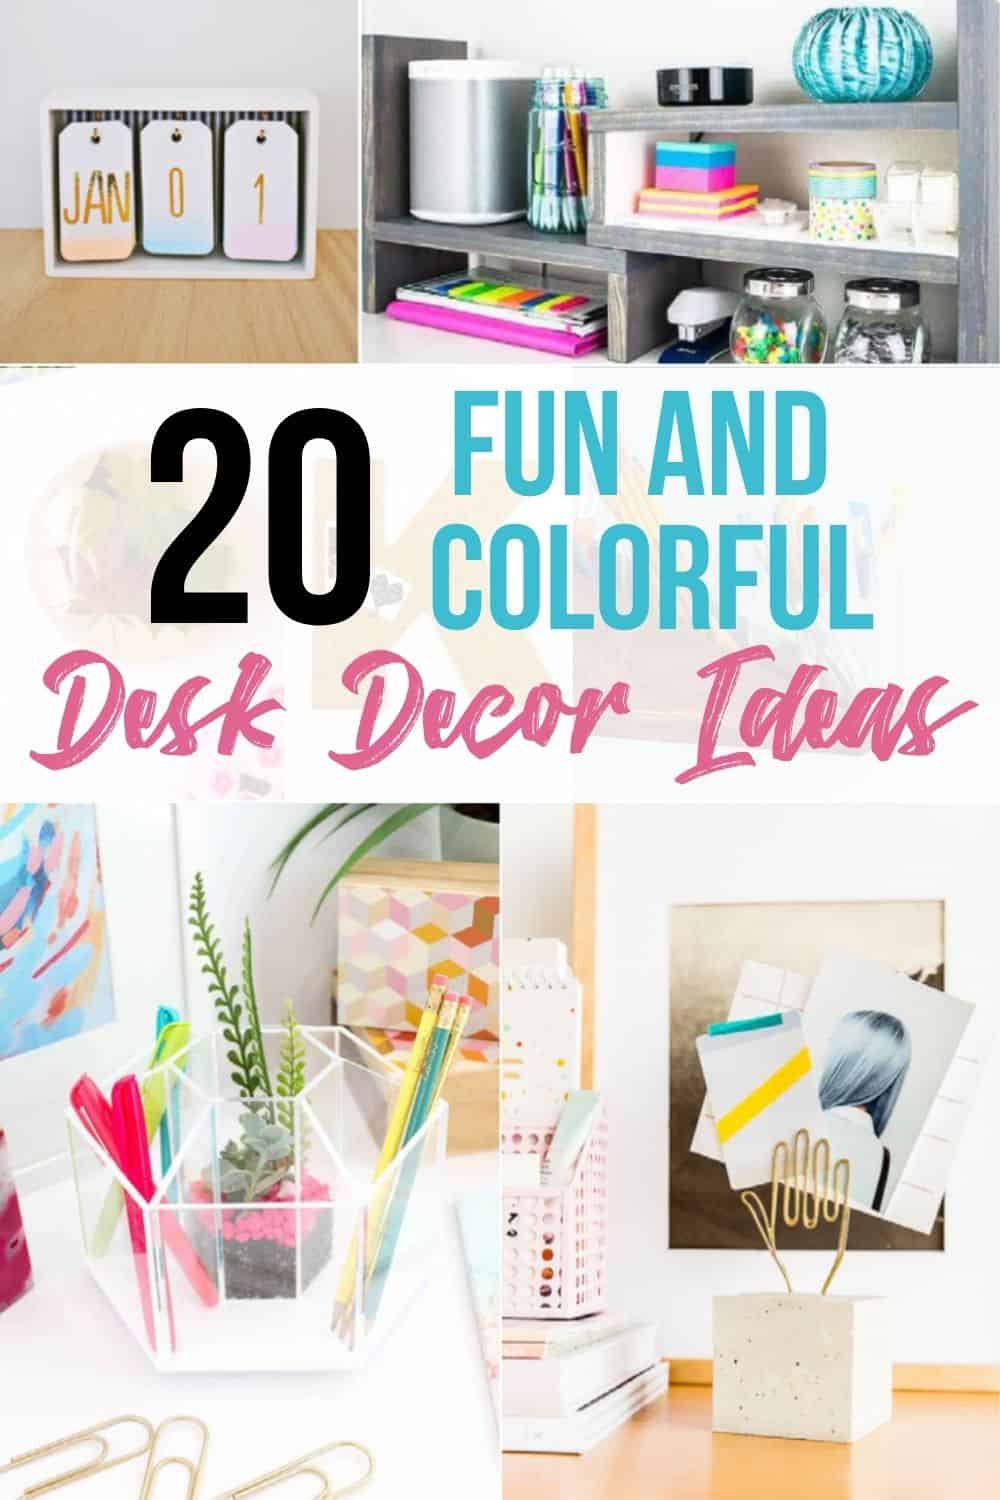 10 Colorful DIY Desk Accessories - The Crafted Life